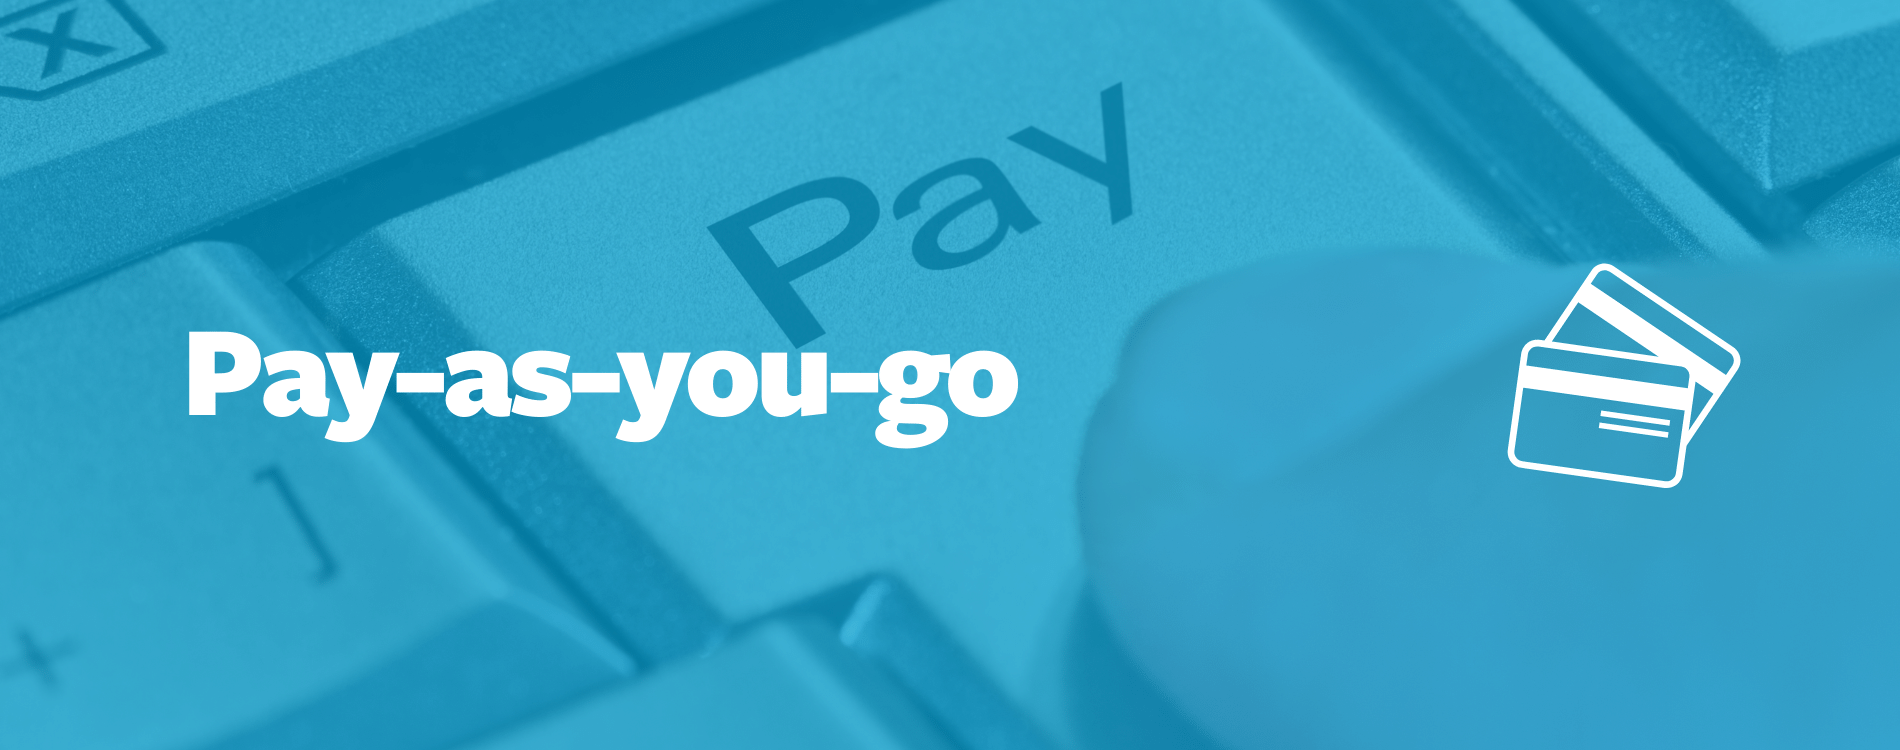 Pay-as-you-go | NI Parcels